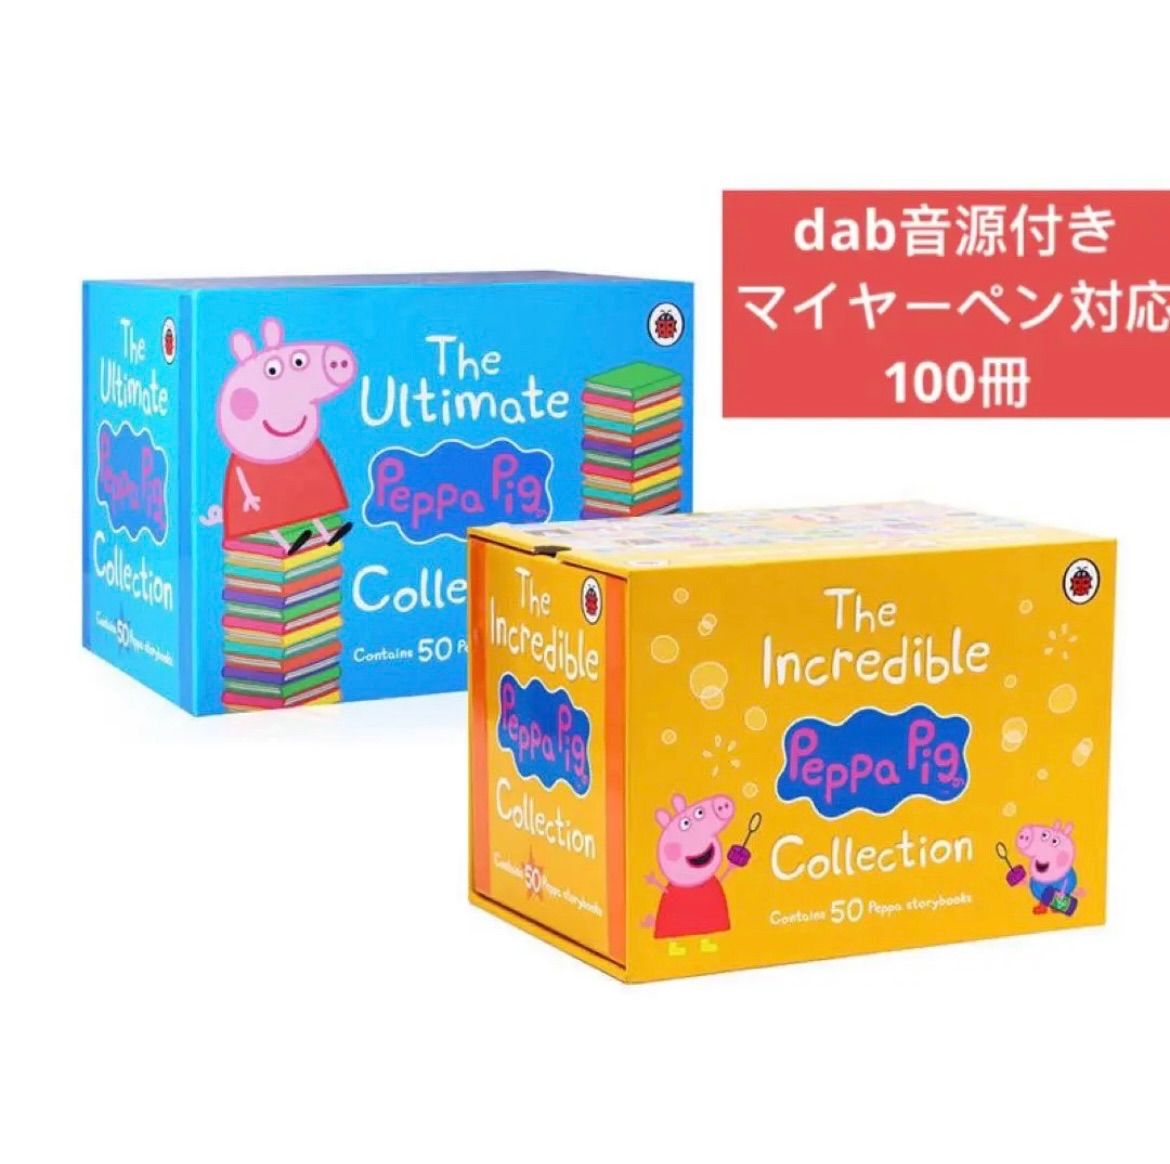 Ultimate Peppa Pig Collection ペッパピッグ